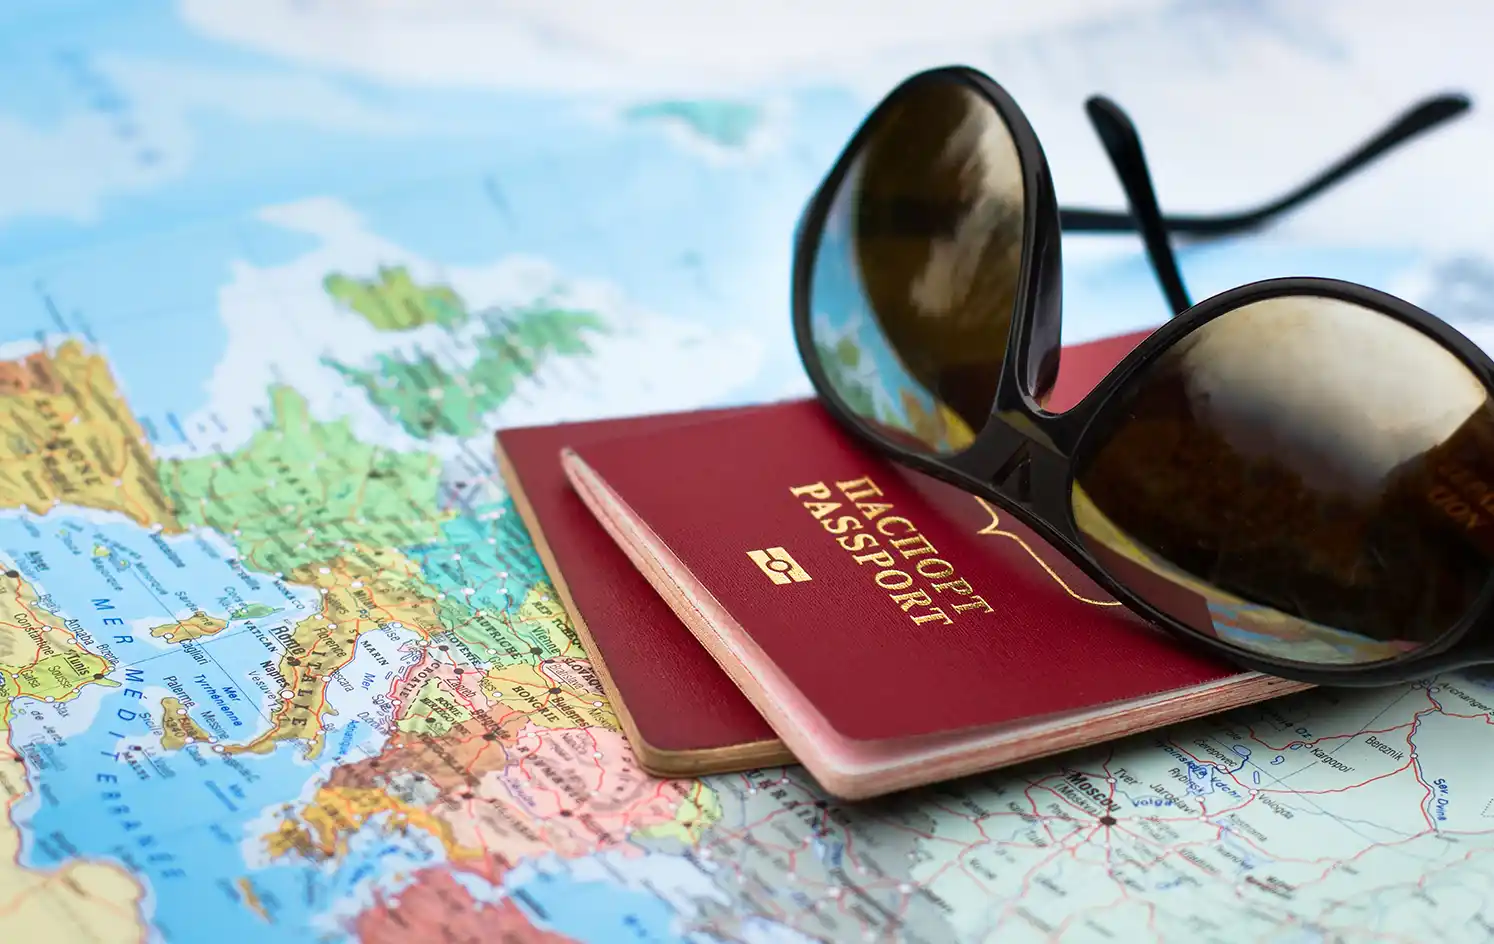 Citizenship by Investment (CBI) options are a short path to acquiring a second passport.